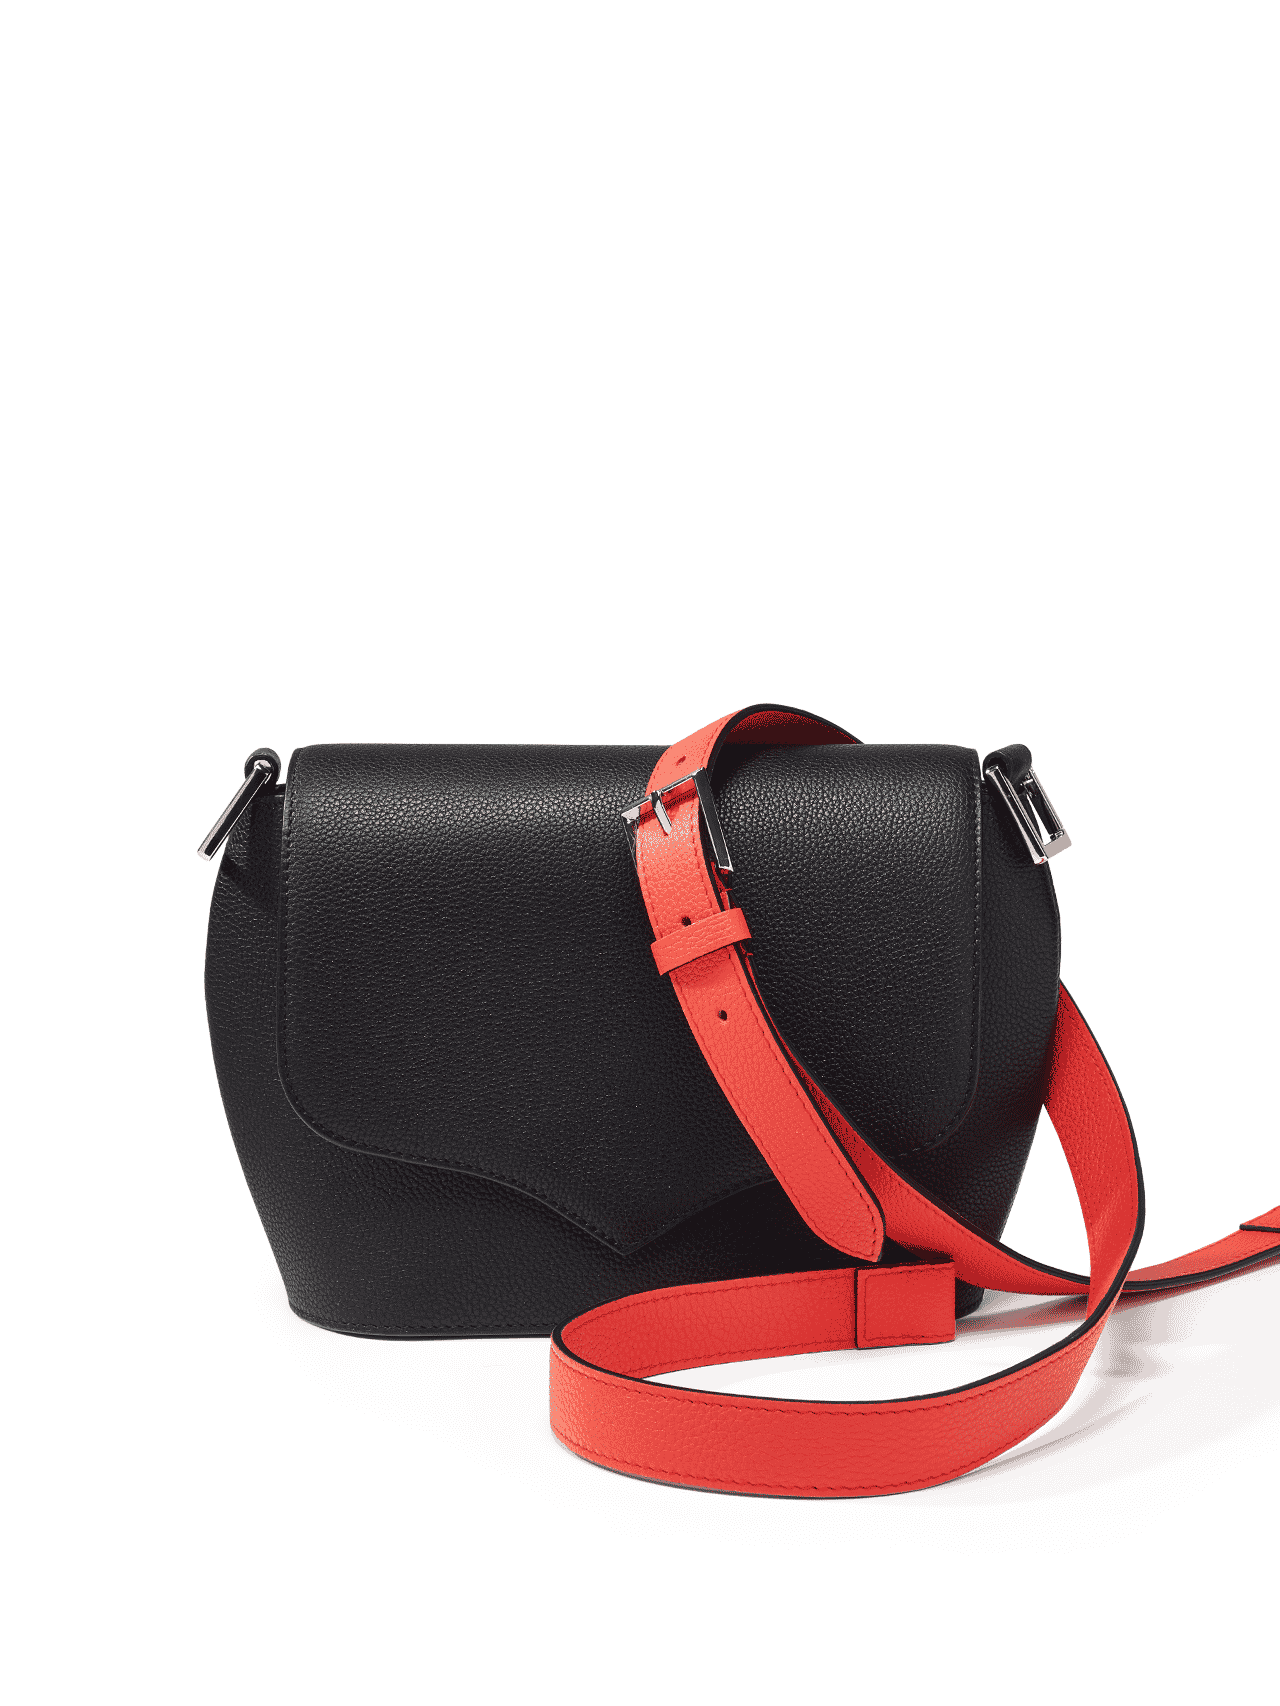 bag leather jean rousseau black red